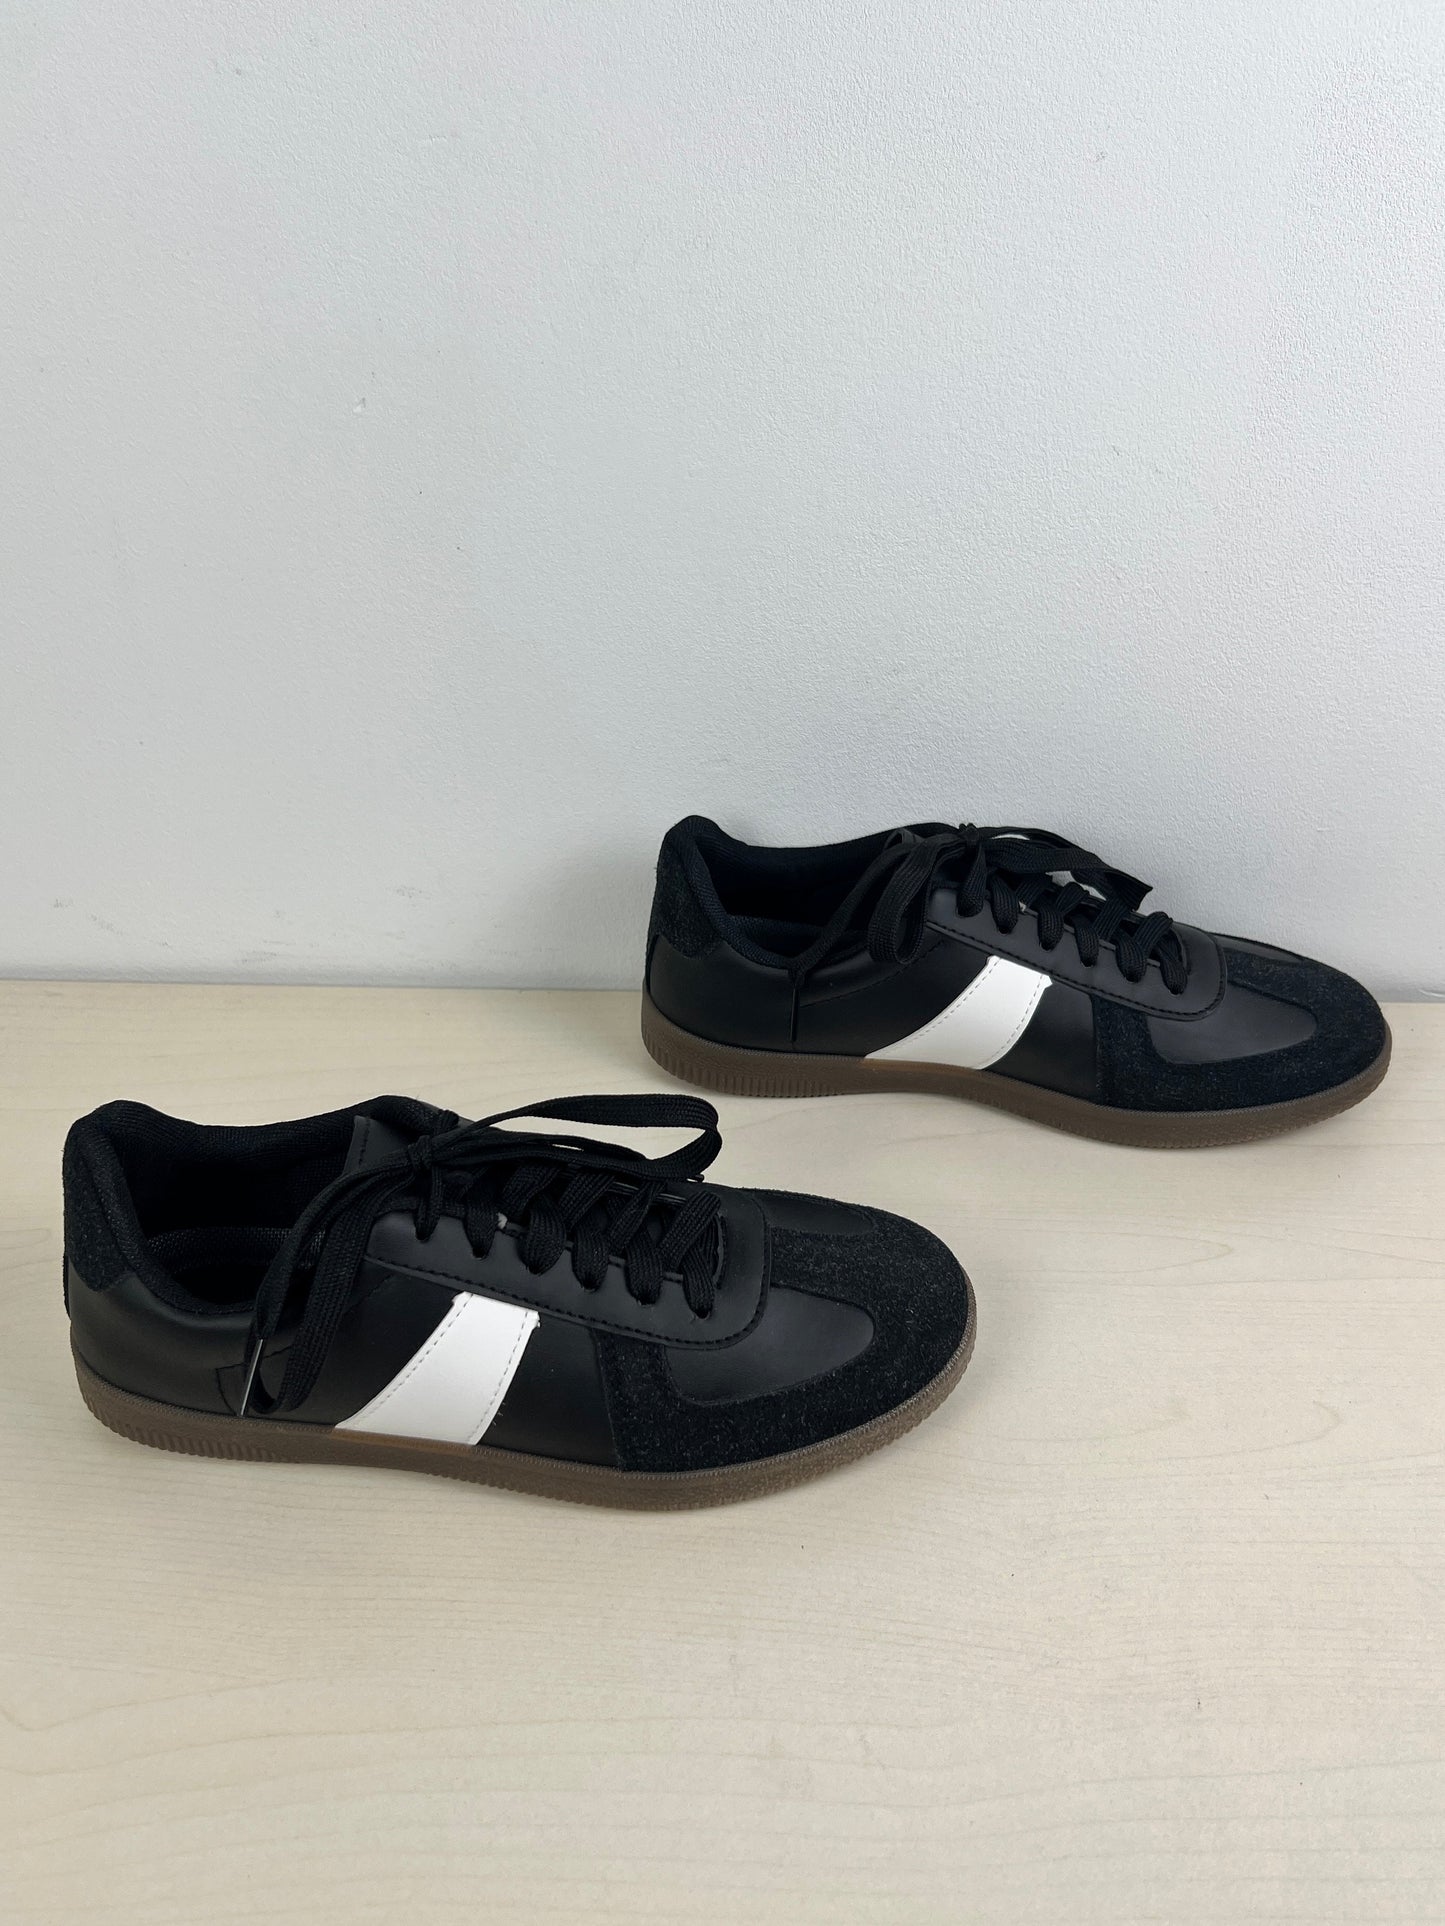 Black Shoes Athletic Madden Girl, Size 7.5